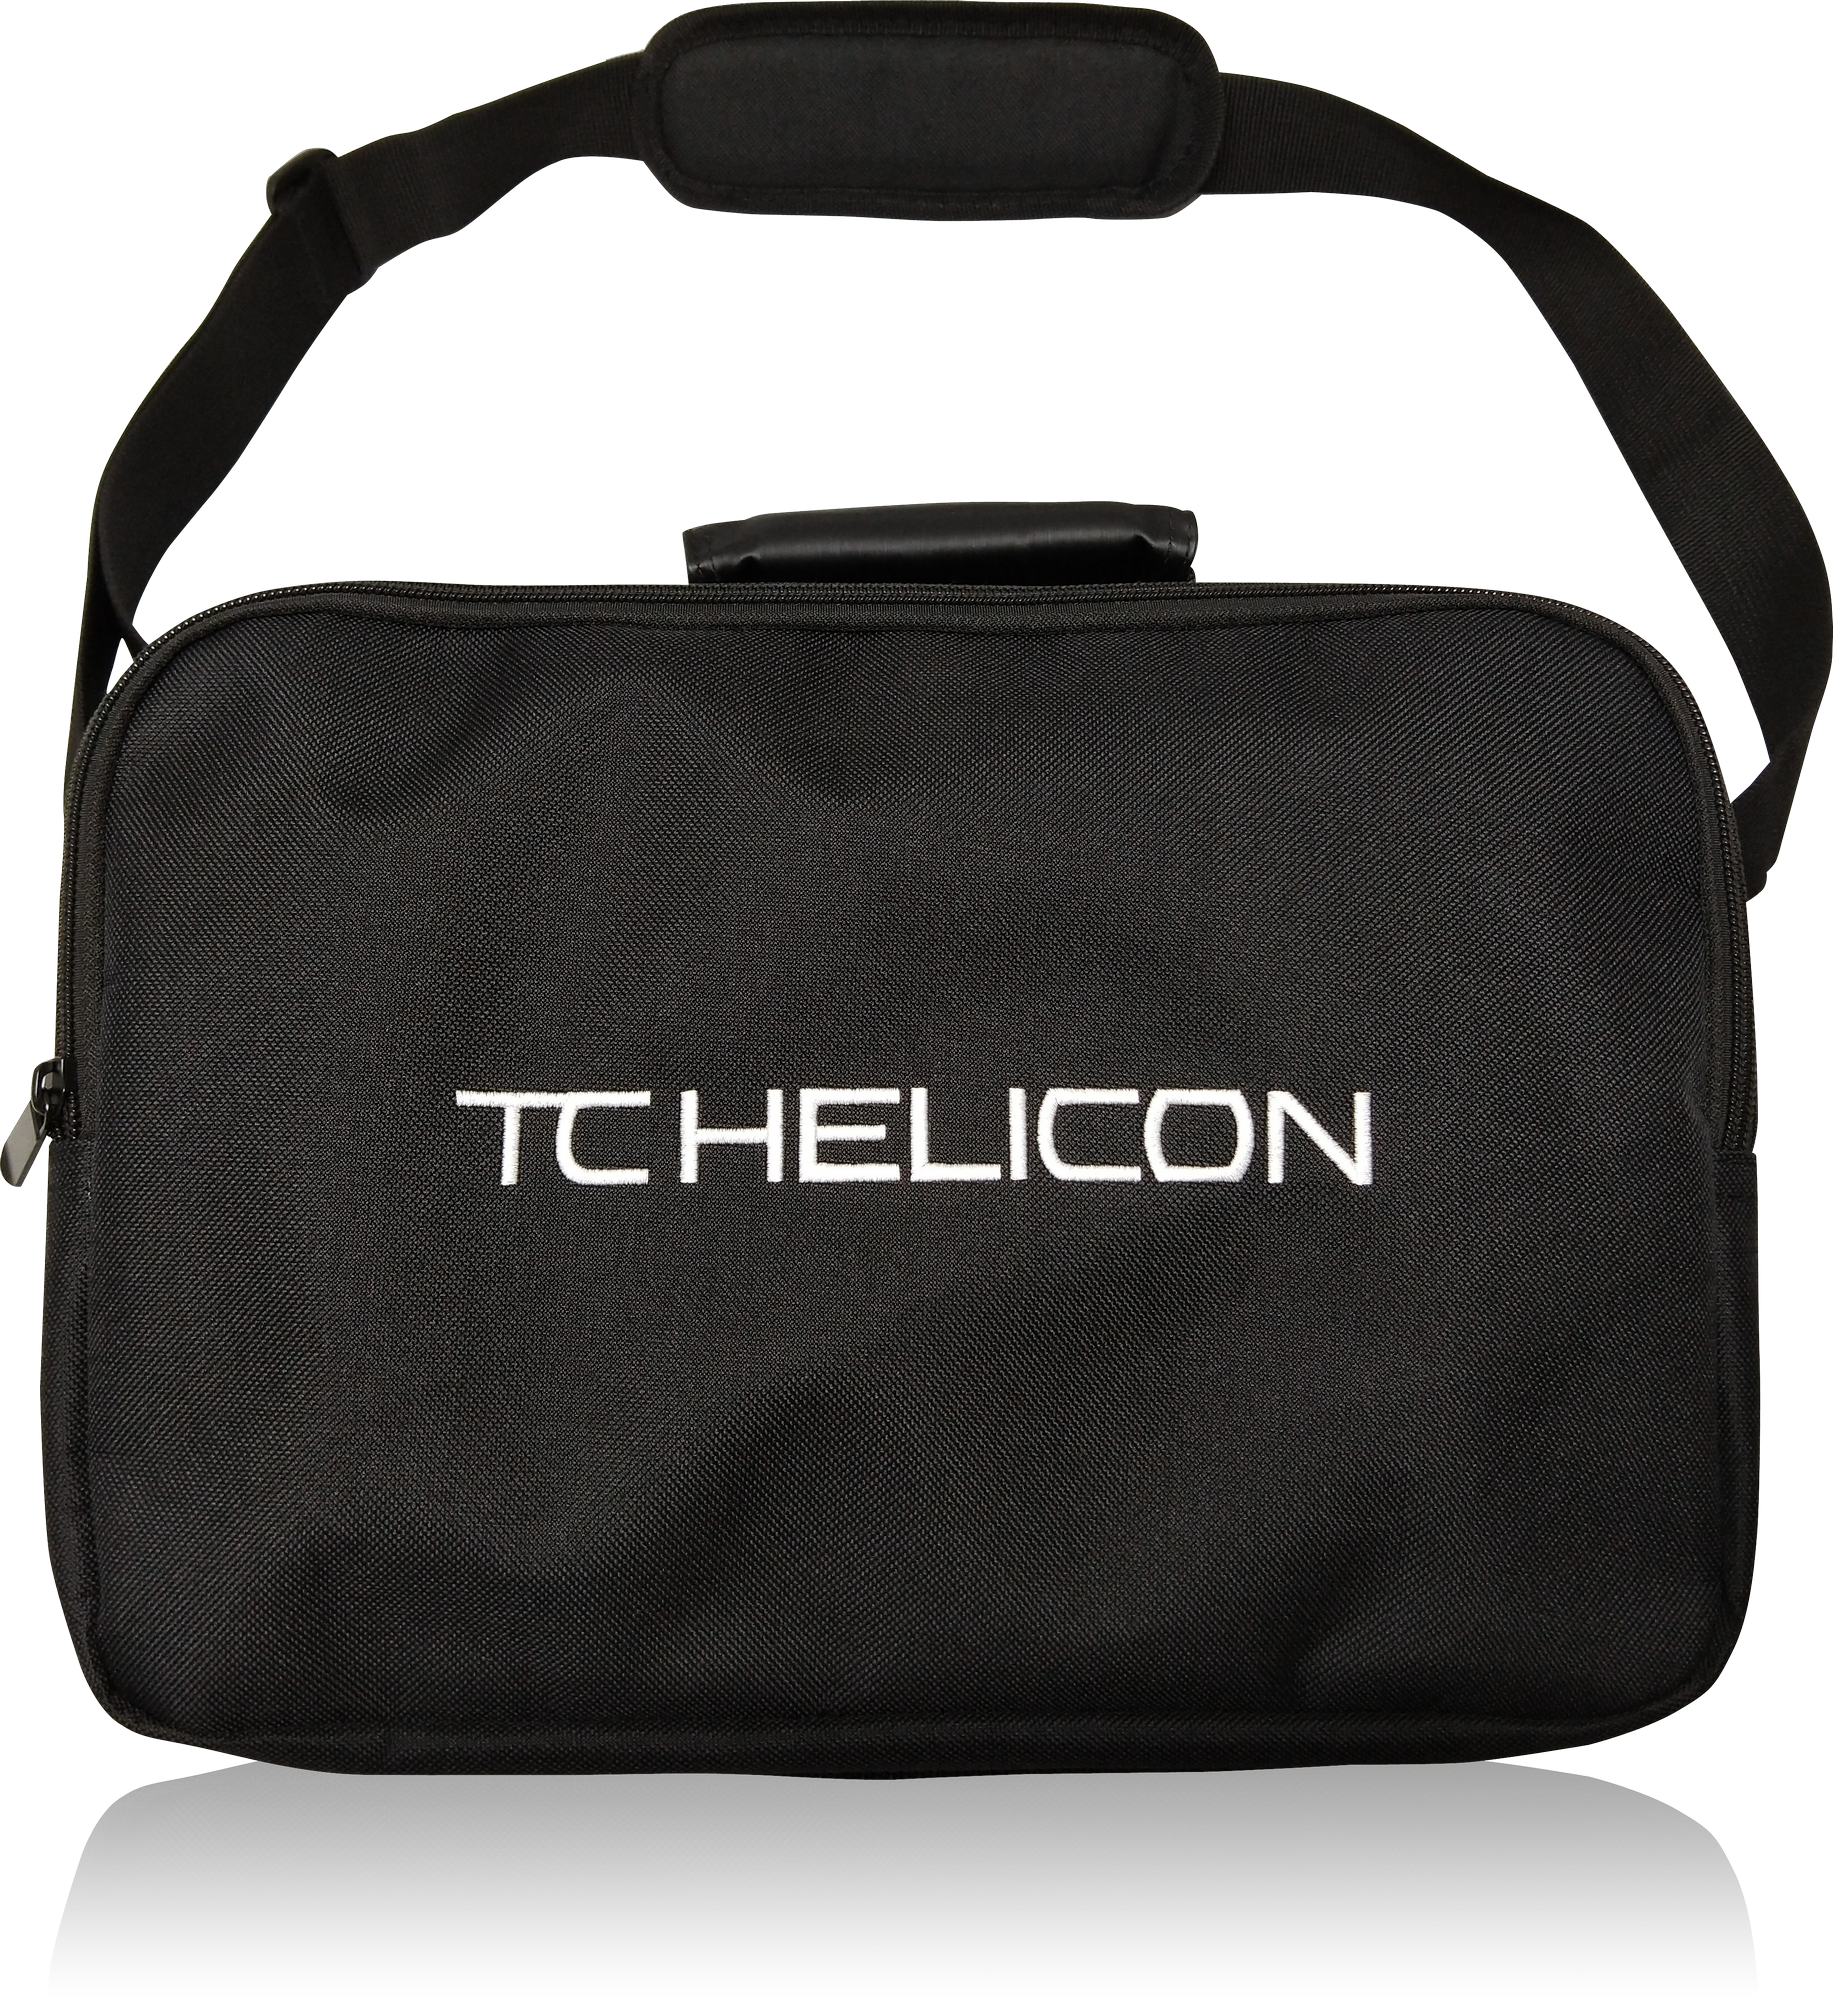 TC HELICON FX150 GIG BAG DURABLE TRAVEL BAG FOR VOICESOLO FX150, TC HELICON, CASES & GIG BAGS, tc-helicon-cases-gig-bags-fx150-gig-bag, ZOSO MUSIC SDN BHD